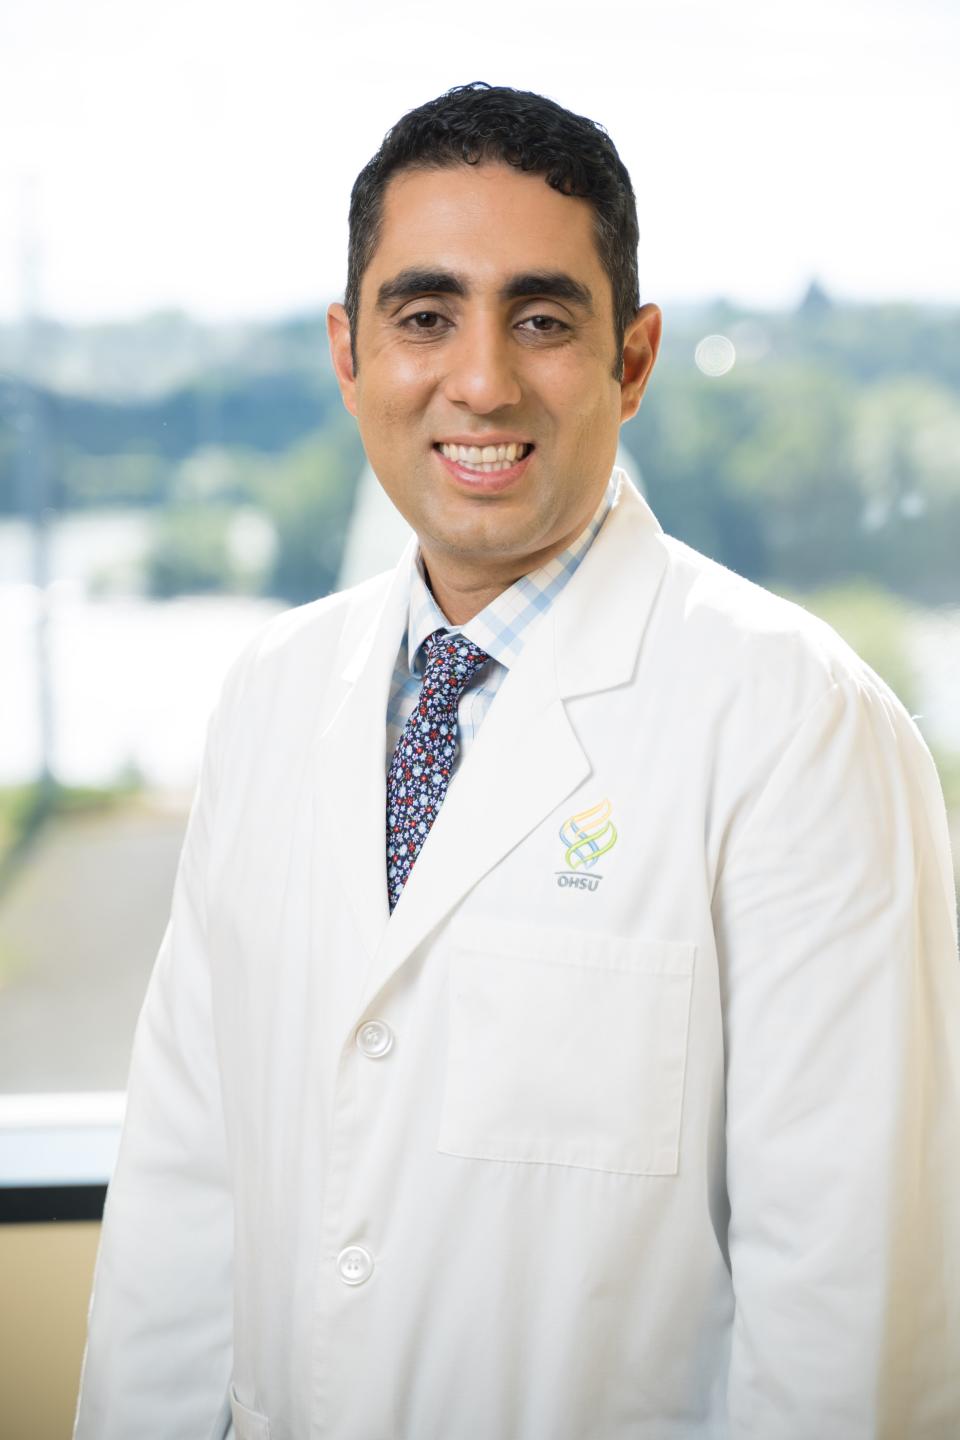 Nima Nabavizadeh is a radiation oncologist and principal investigator of the Pathfinder multi-cancer early detection study.